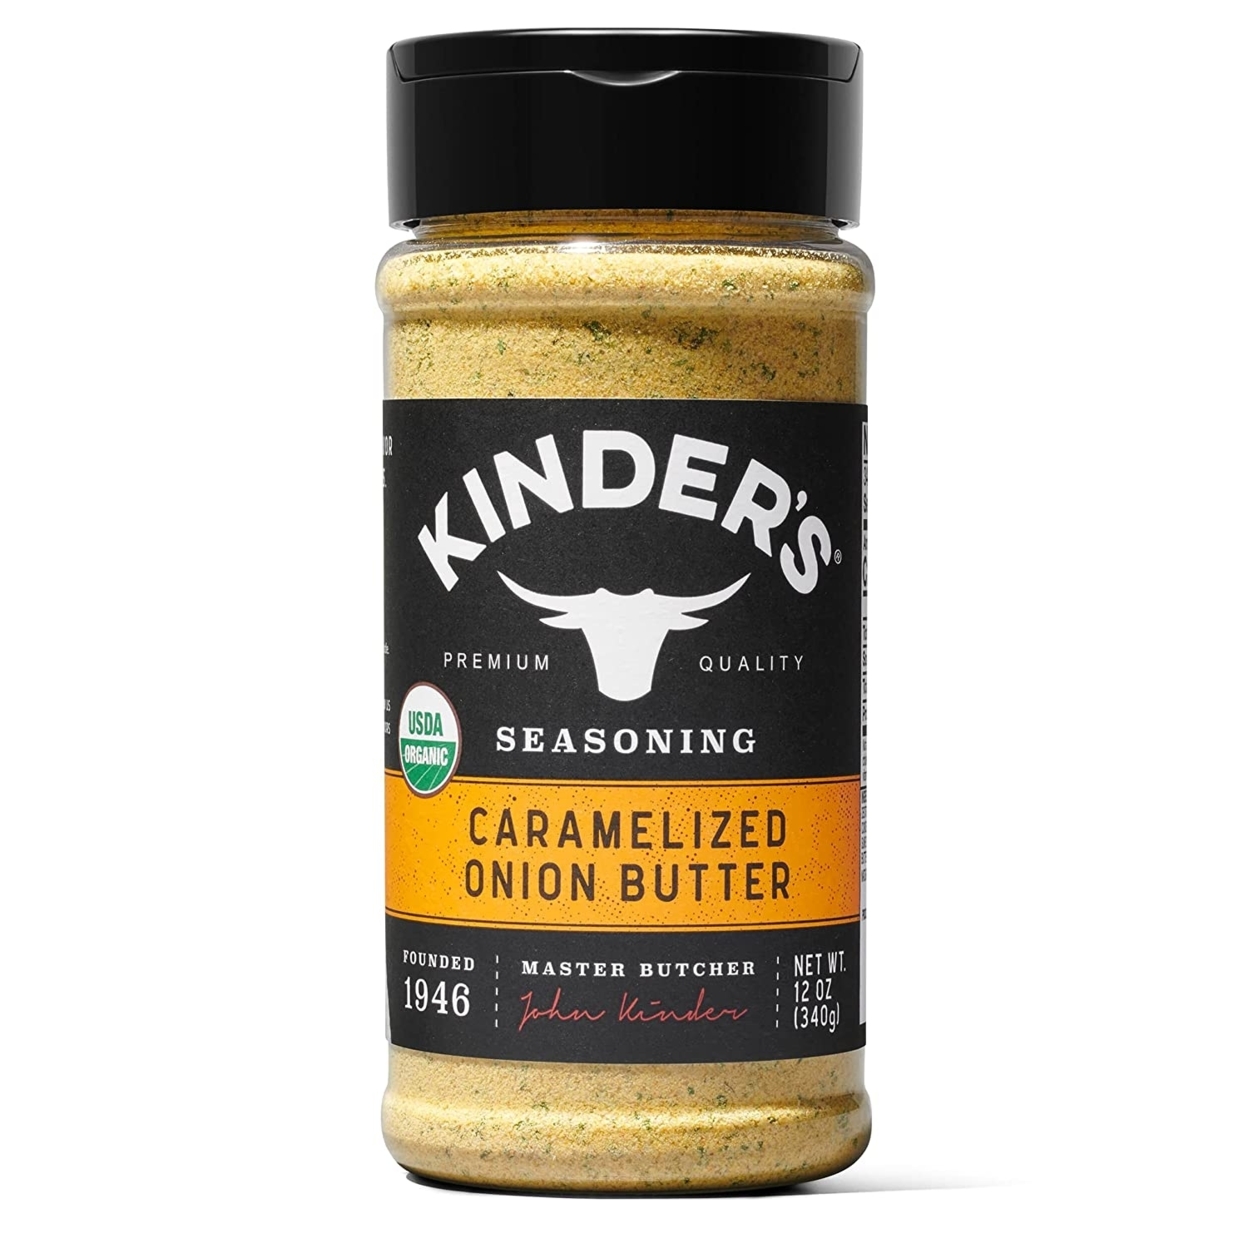 Kinder's Organic Caramelized Onion Butter Seasoning, 12 Ounce